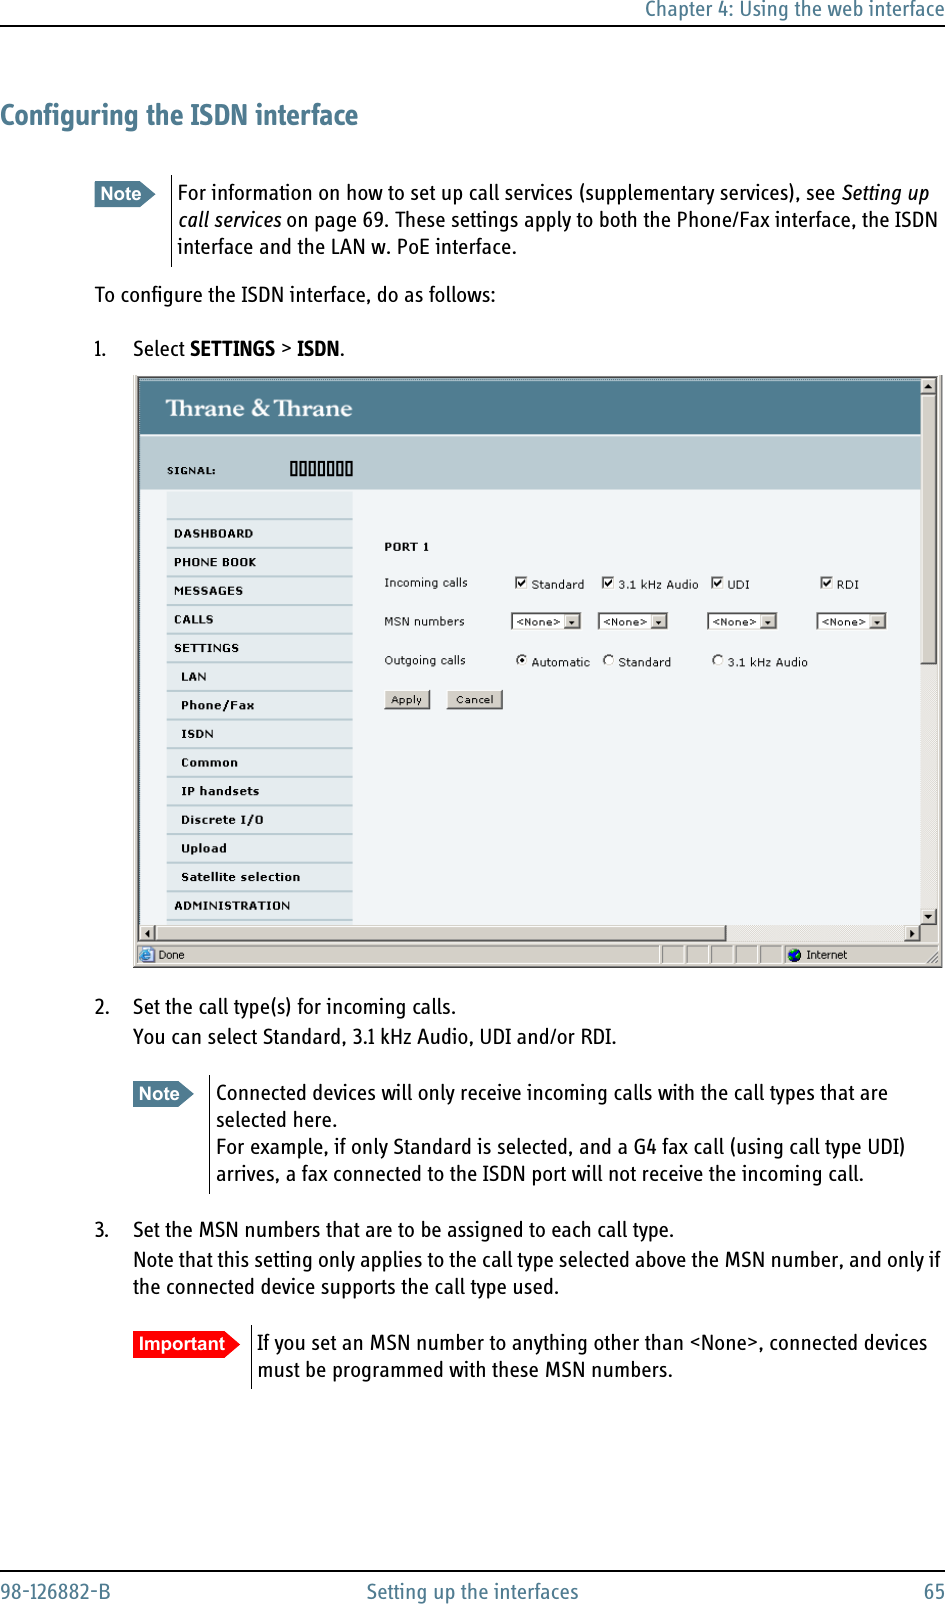 Chapter 4: Using the web interface98-126882-B Setting up the interfaces 65Configuring the ISDN interfaceTo configure the ISDN interface, do as follows:1. Select SETTINGS &gt; ISDN.2. Set the call type(s) for incoming calls.You can select Standard, 3.1 kHz Audio, UDI and/or RDI. 3. Set the MSN numbers that are to be assigned to each call type. Note that this setting only applies to the call type selected above the MSN number, and only if the connected device supports the call type used.Note For information on how to set up call services (supplementary services), see Setting up call services on page 69. These settings apply to both the Phone/Fax interface, the ISDN interface and the LAN w. PoE interface.Note Connected devices will only receive incoming calls with the call types that are selected here. For example, if only Standard is selected, and a G4 fax call (using call type UDI) arrives, a fax connected to the ISDN port will not receive the incoming call. Important If you set an MSN number to anything other than &lt;None&gt;, connected devices must be programmed with these MSN numbers.